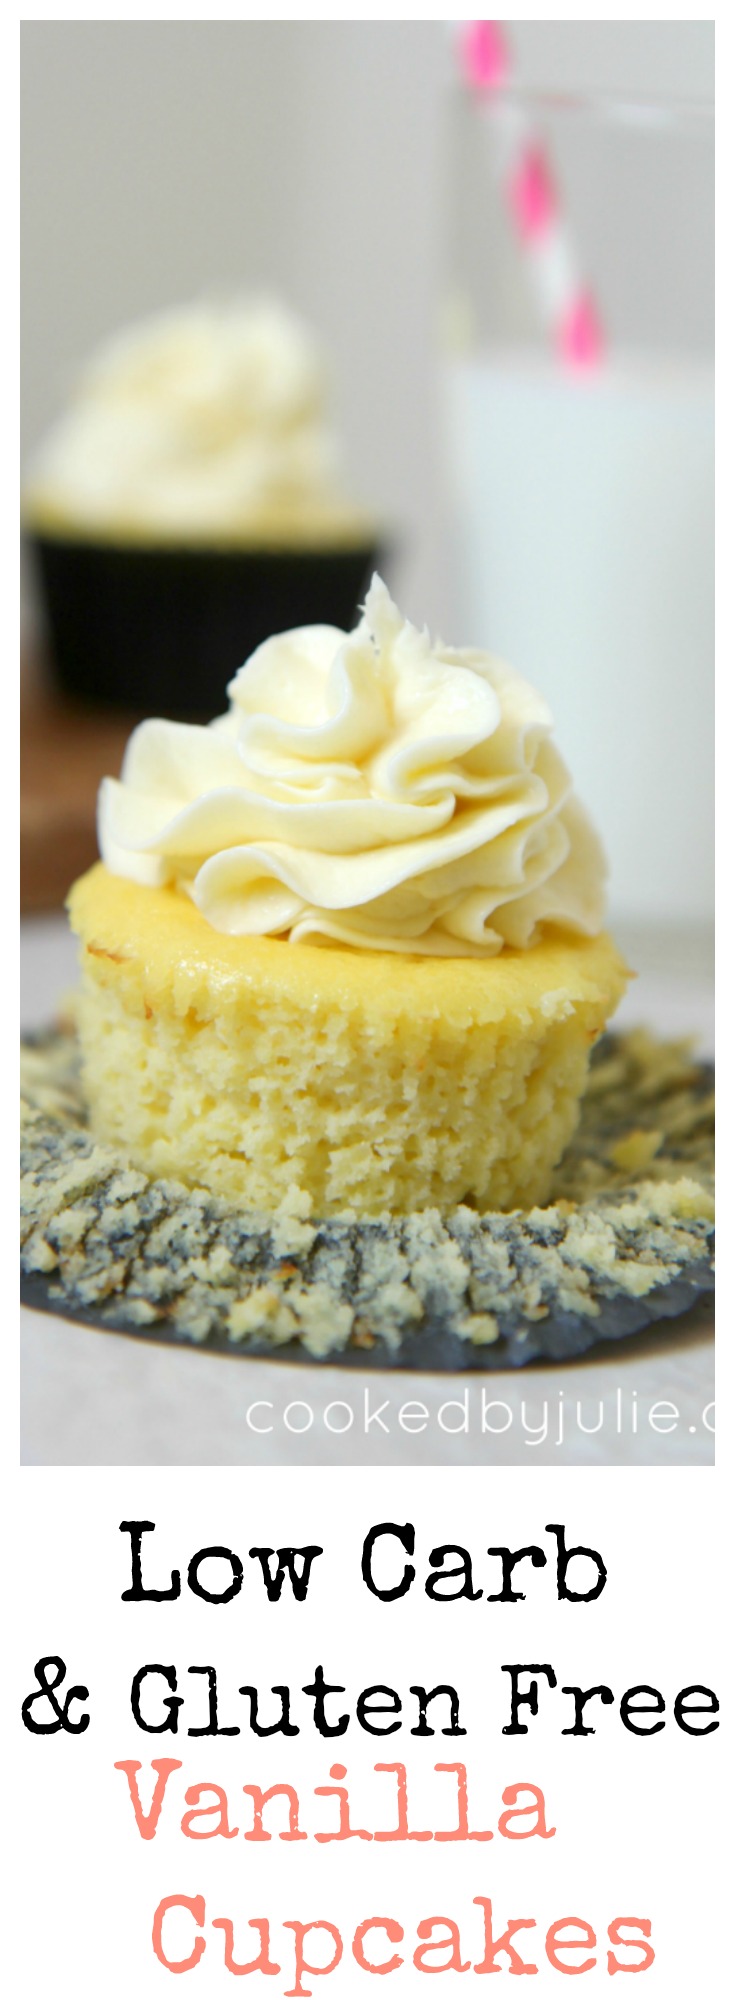 Learn how to make these low carb and gluten free vanilla cupcakes at cookedbyjulie.com